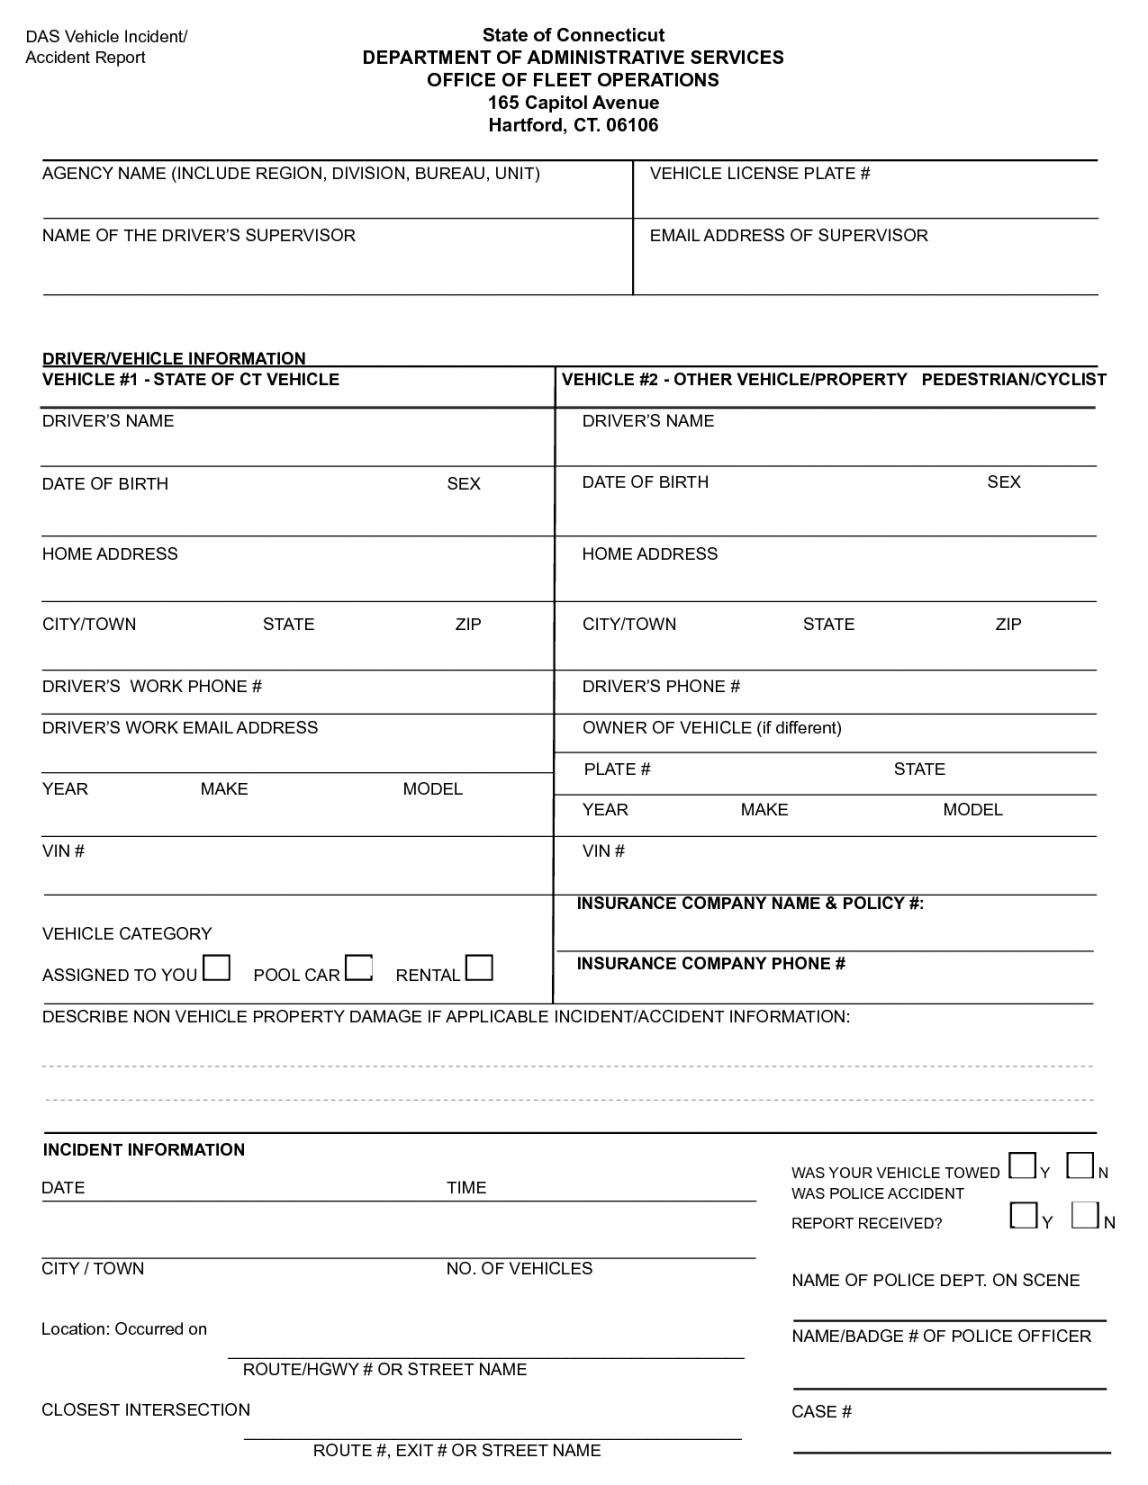 Vehicle Incident Report Template Inside Motor Vehicle Accident Report Form Template